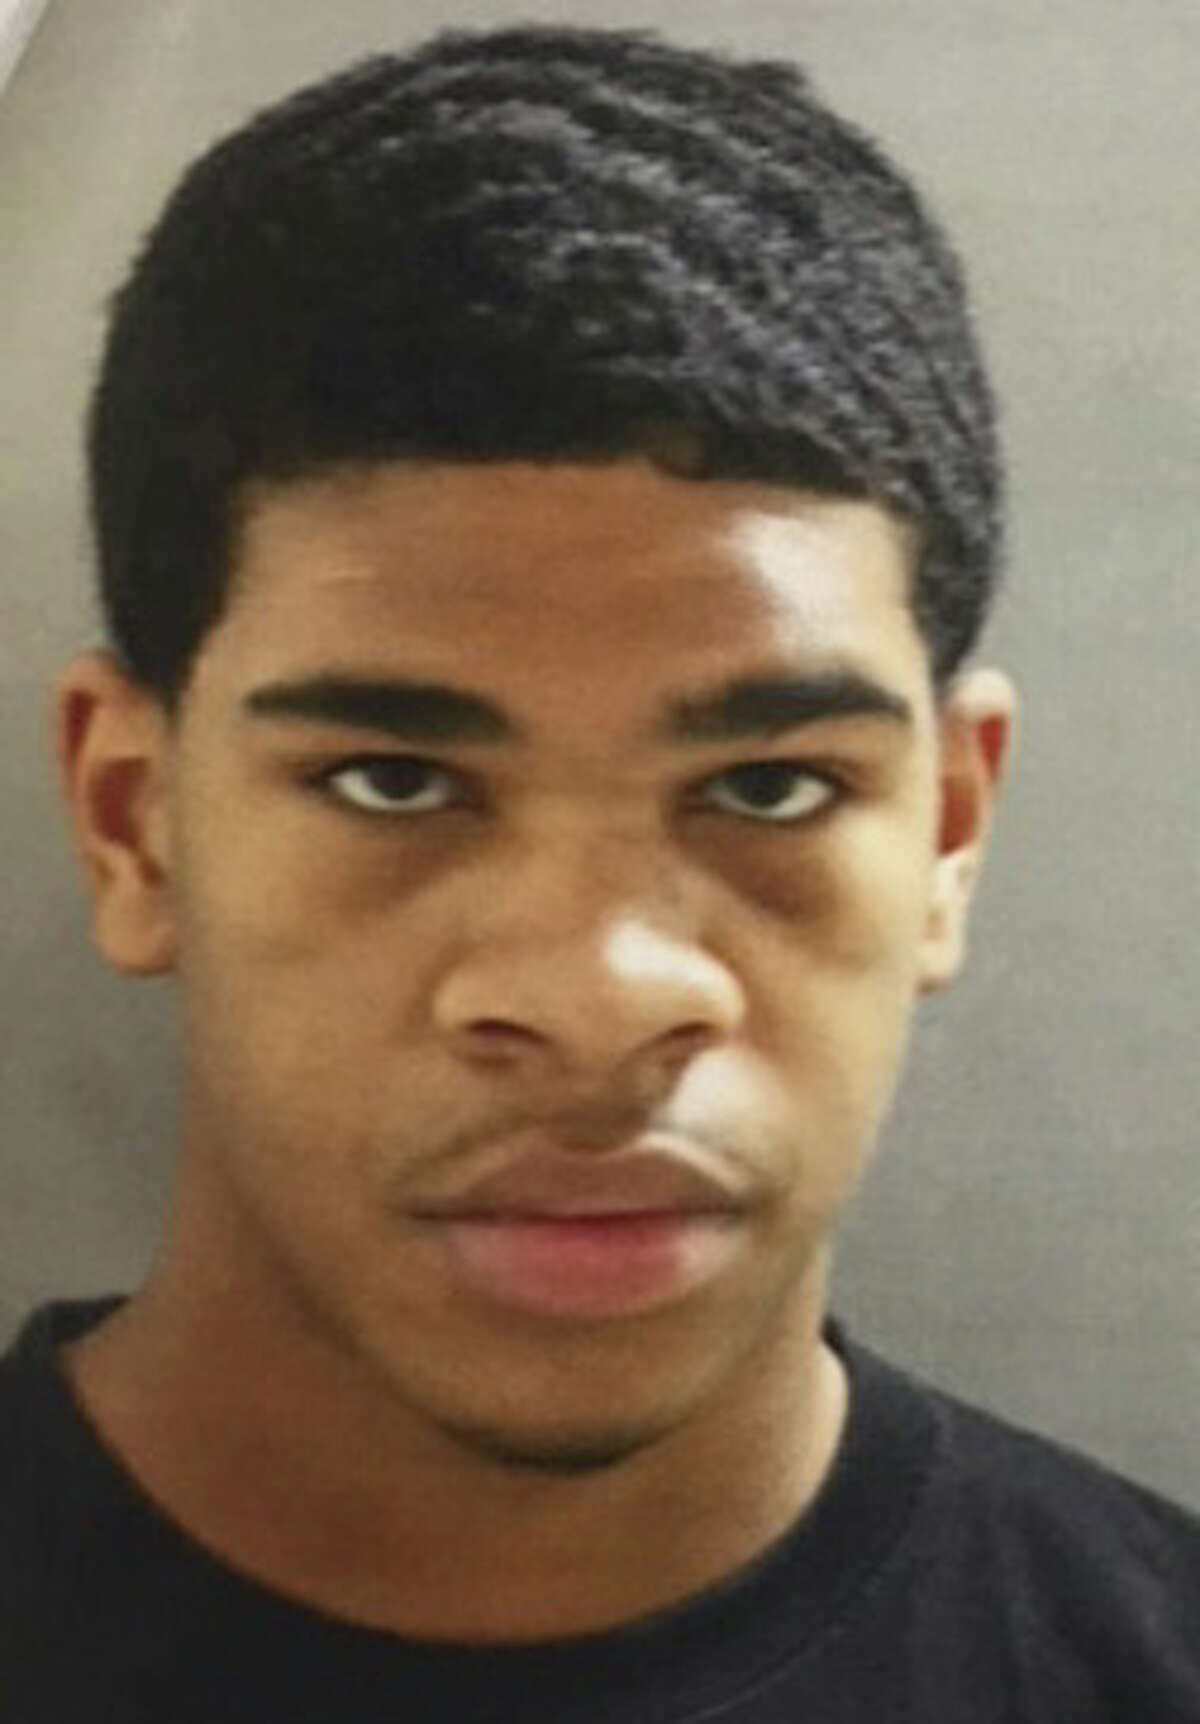 Sources say Jahrell West and two other juvenile inmates escaped the Harris County juvenile center.